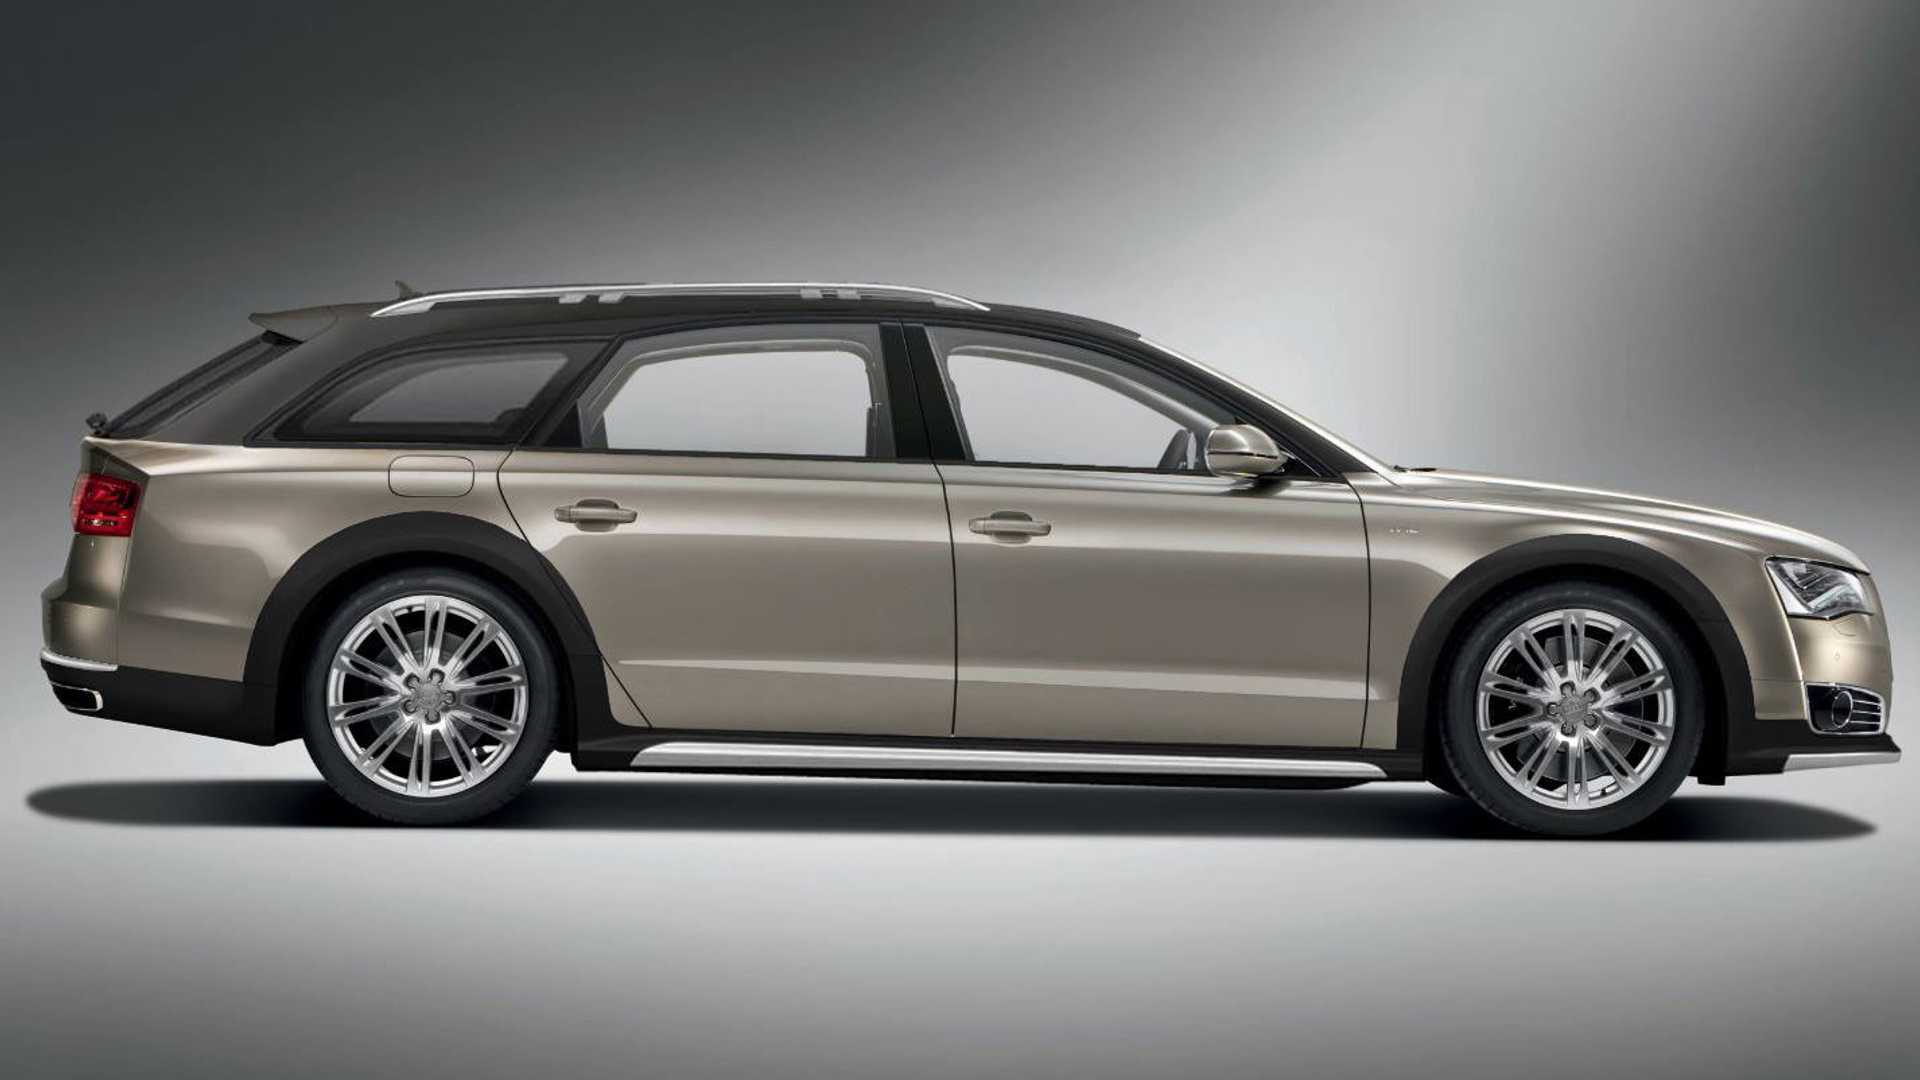 https://s1.cdn.autoevolution.com/images/news/castagna-milano-audi-a8-allroad-w12-is-so-wrong-that-it-needs-to-happen-131221_1.jpg